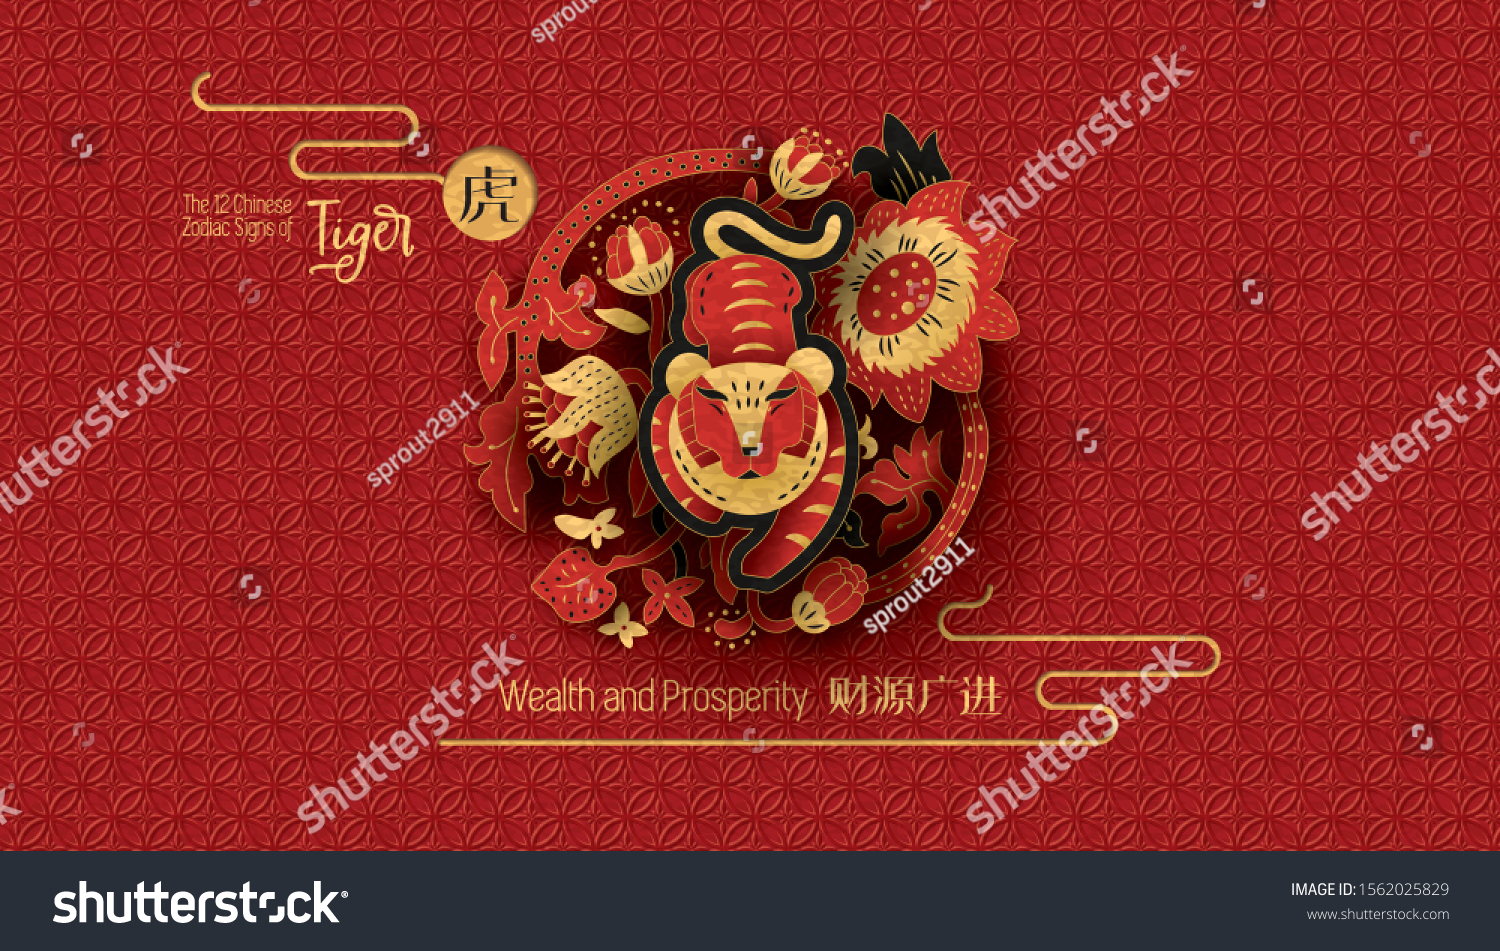 SVG of The 12 Chinese Zodiac Signs of Tiger with corresponding hieroglyphs. Happy Chinese New Year greeting. Vector illustration. svg